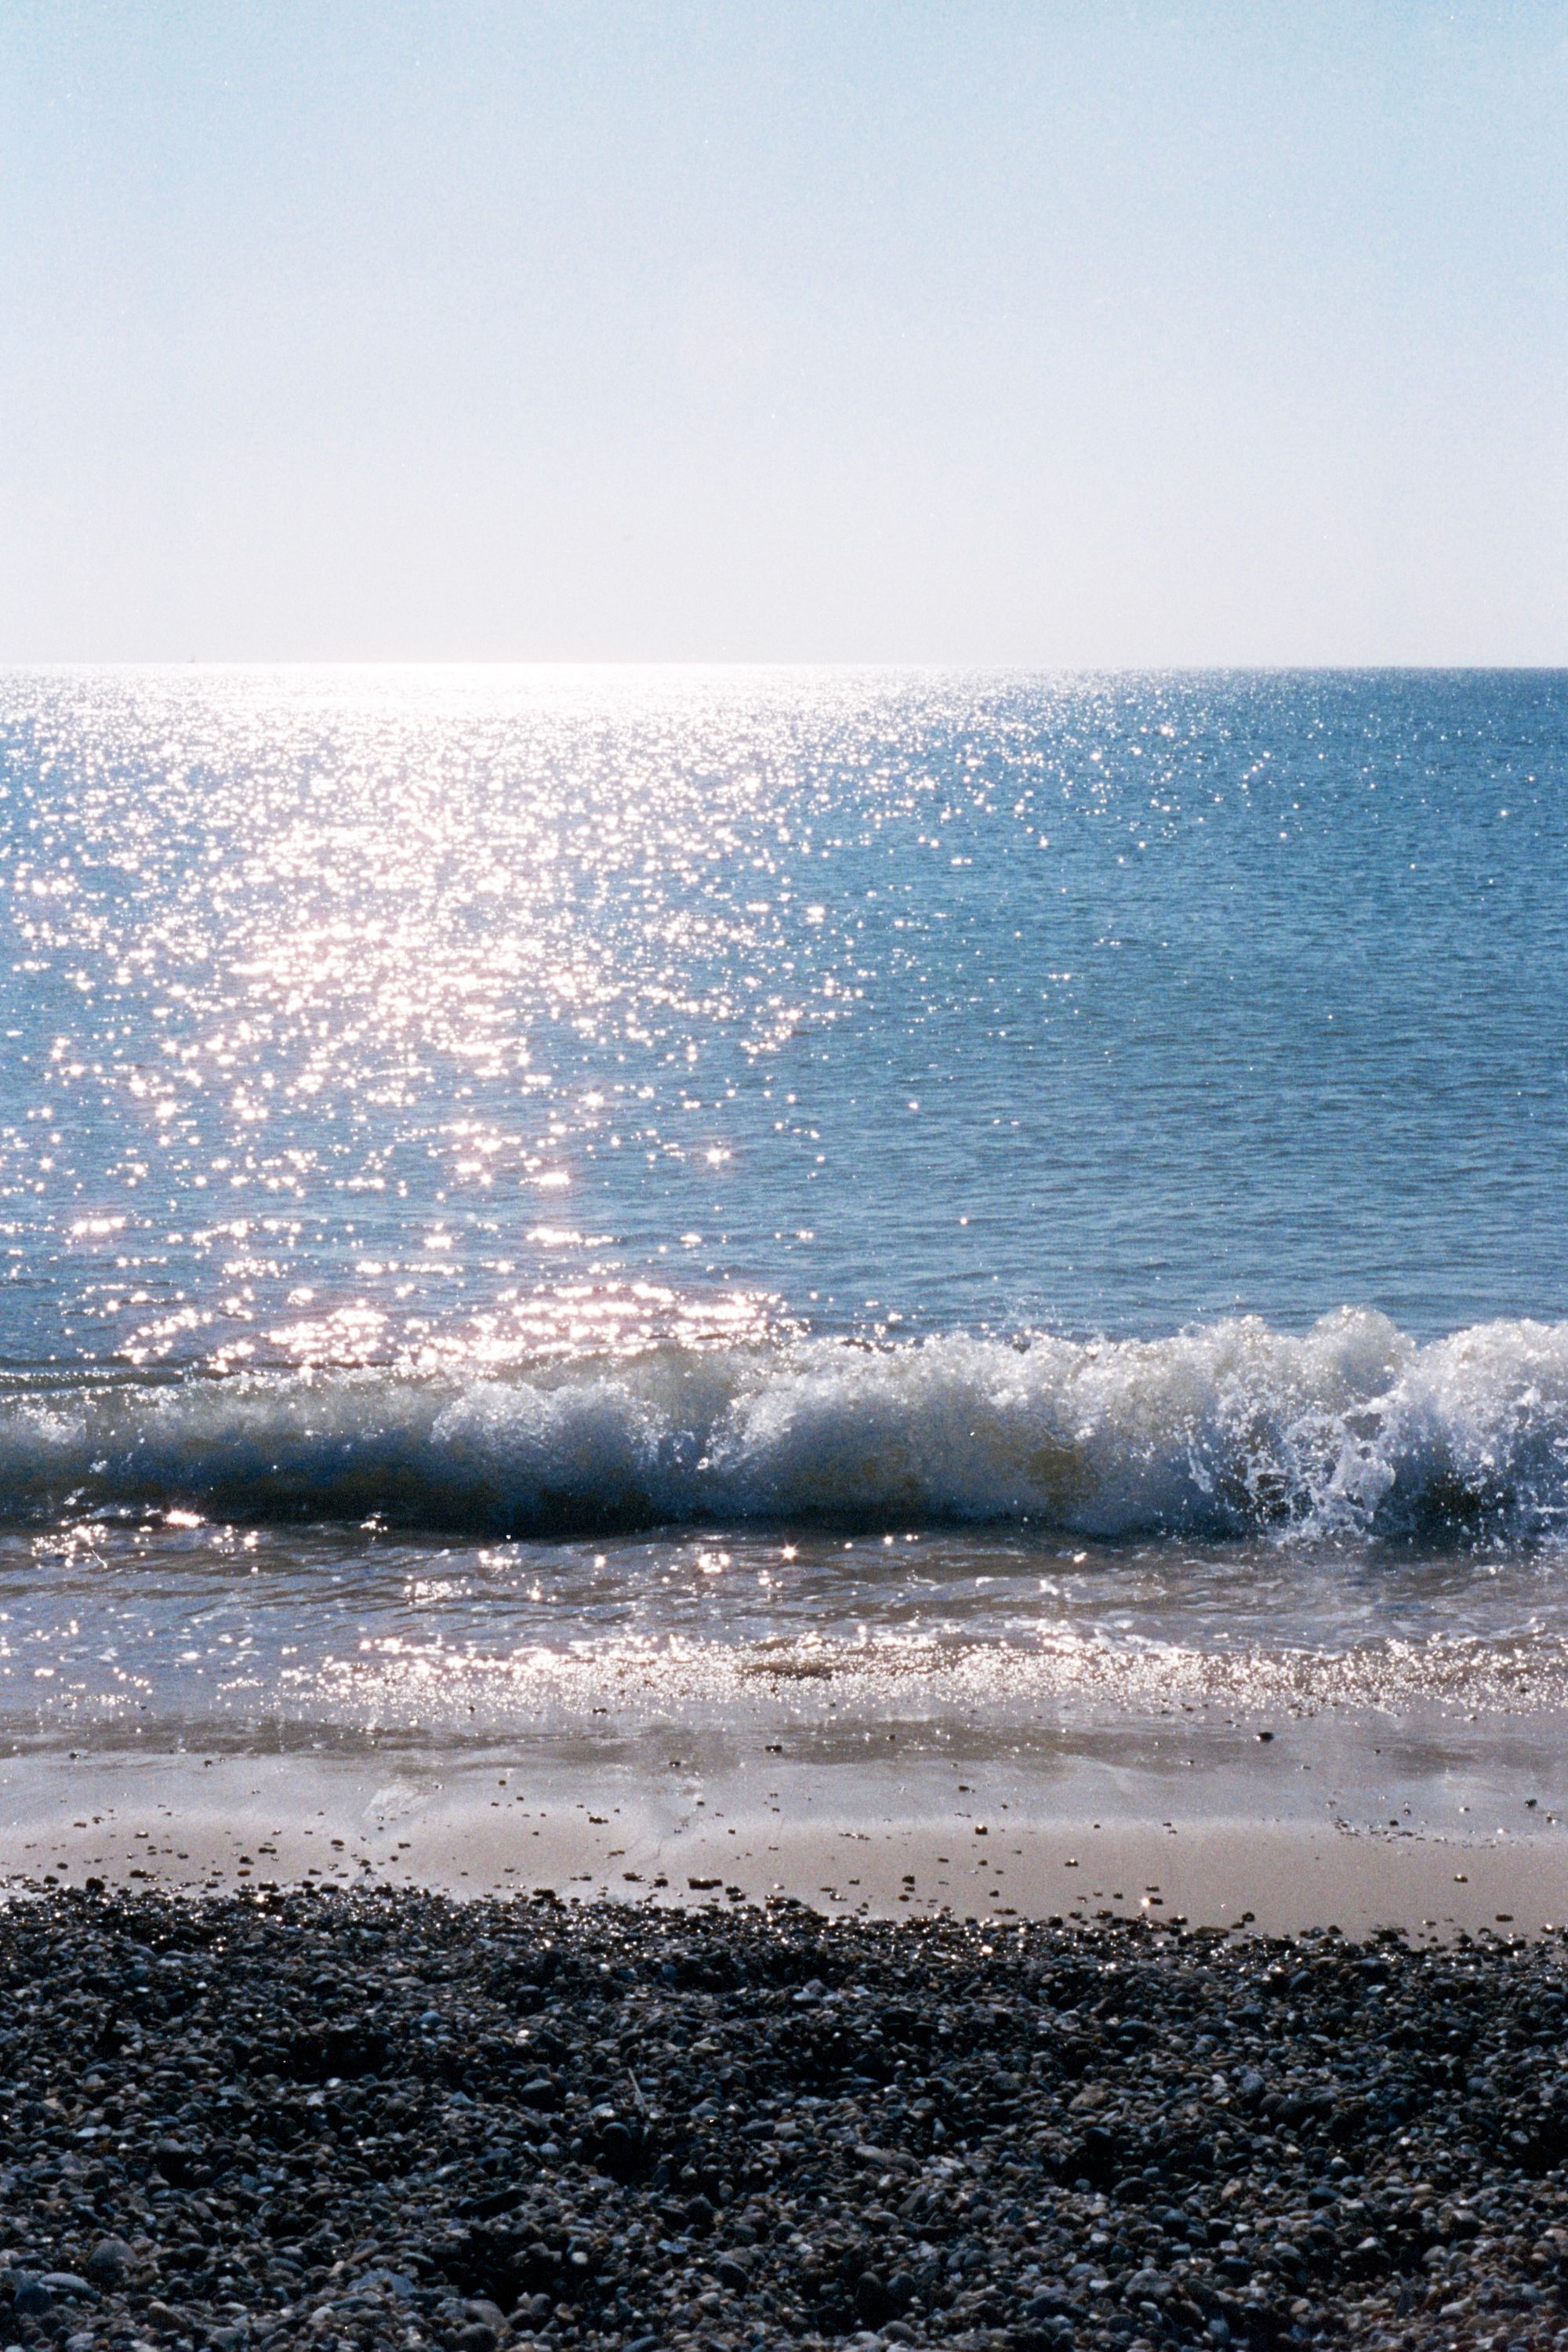 A view out to sea from a shingle beach, with the water and the gentle waves sparkling in the fresh morning blue.